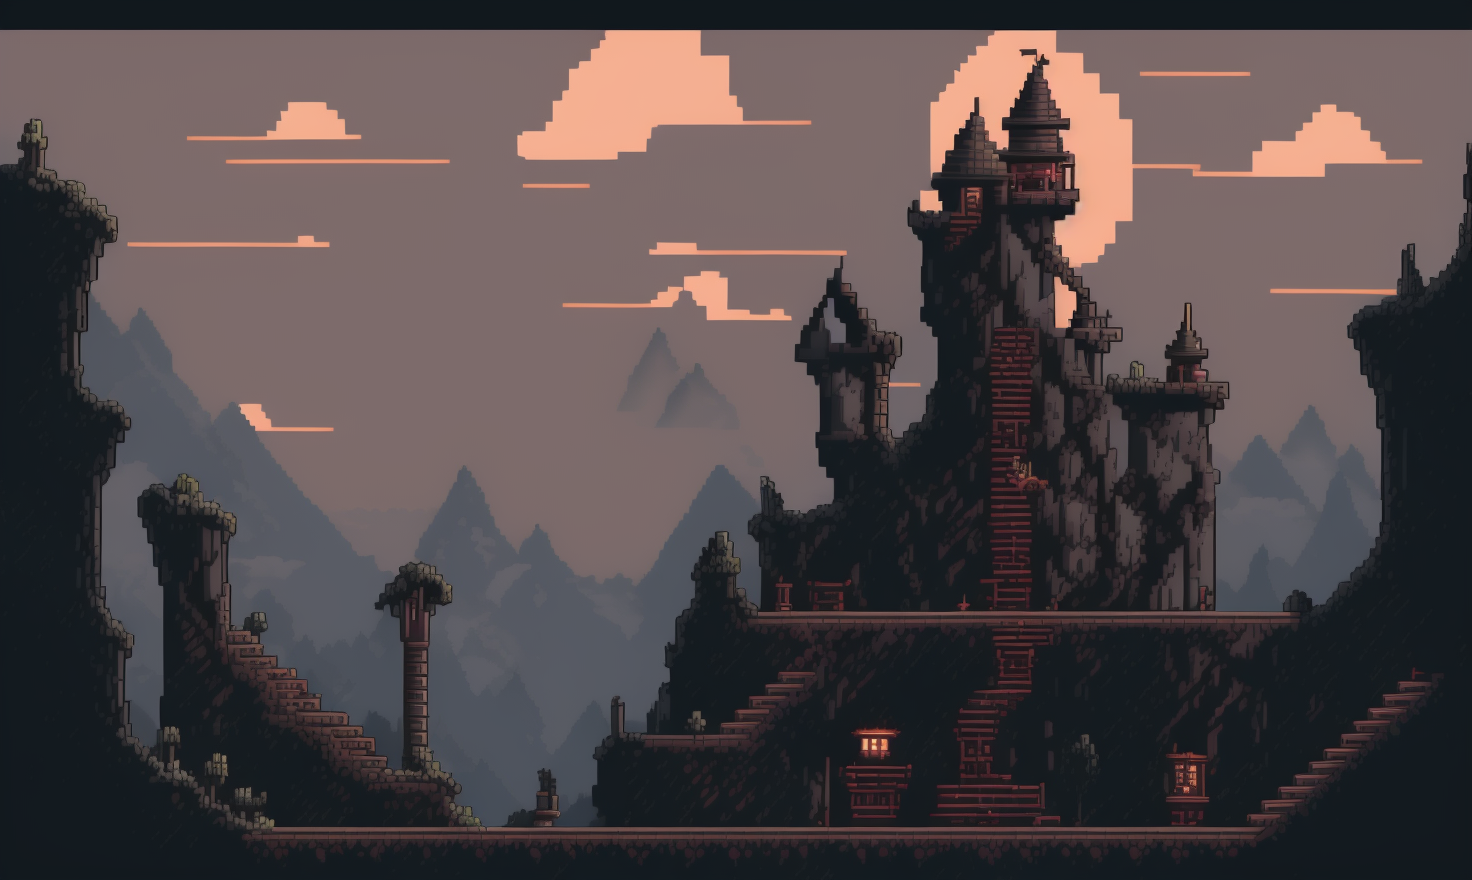 pixelart  video game environment, Create an image of a dark and ominous castle, with towering walls, winding staircases, a...